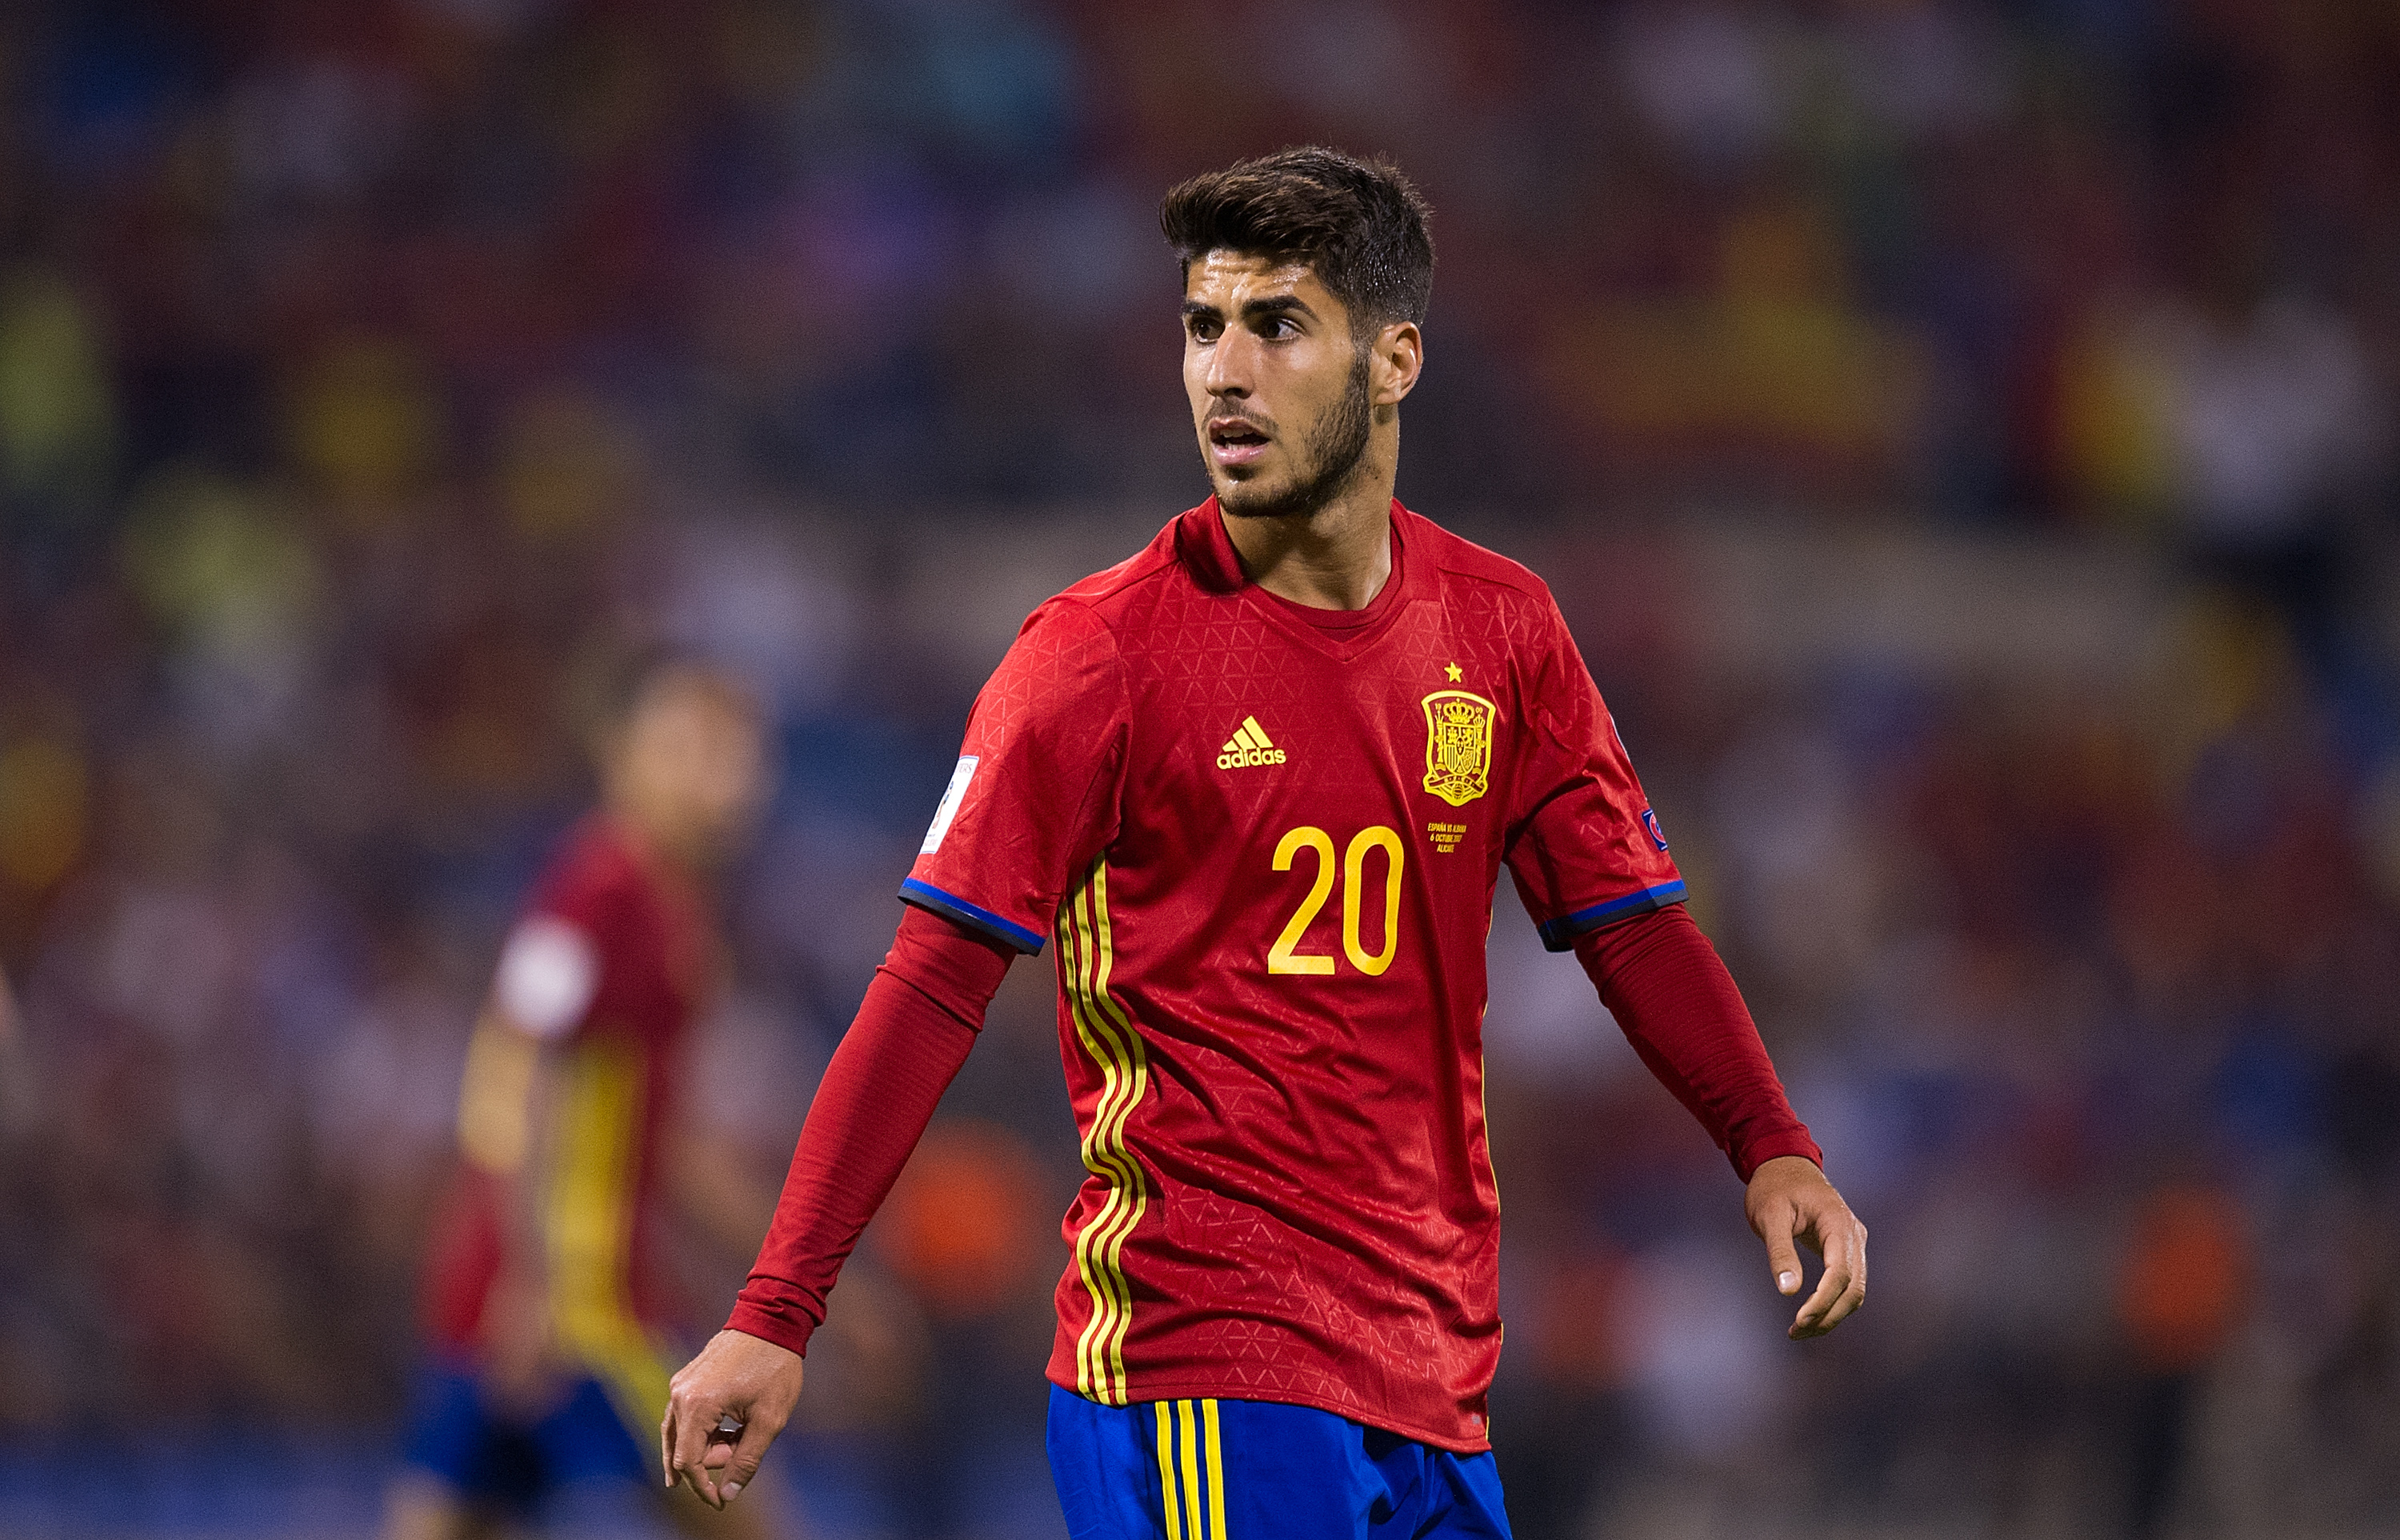 ALICANTE, SPAIN - OCTOBER 06: Marco Asensio of Spain looks on during the FIFA 2018 World Cup Qualifier between Spain and Albania at Estadio Jose Rico Perez on October 6, 2017 in Alicante, Spain. (Photo by Denis Doyle/Getty Images)